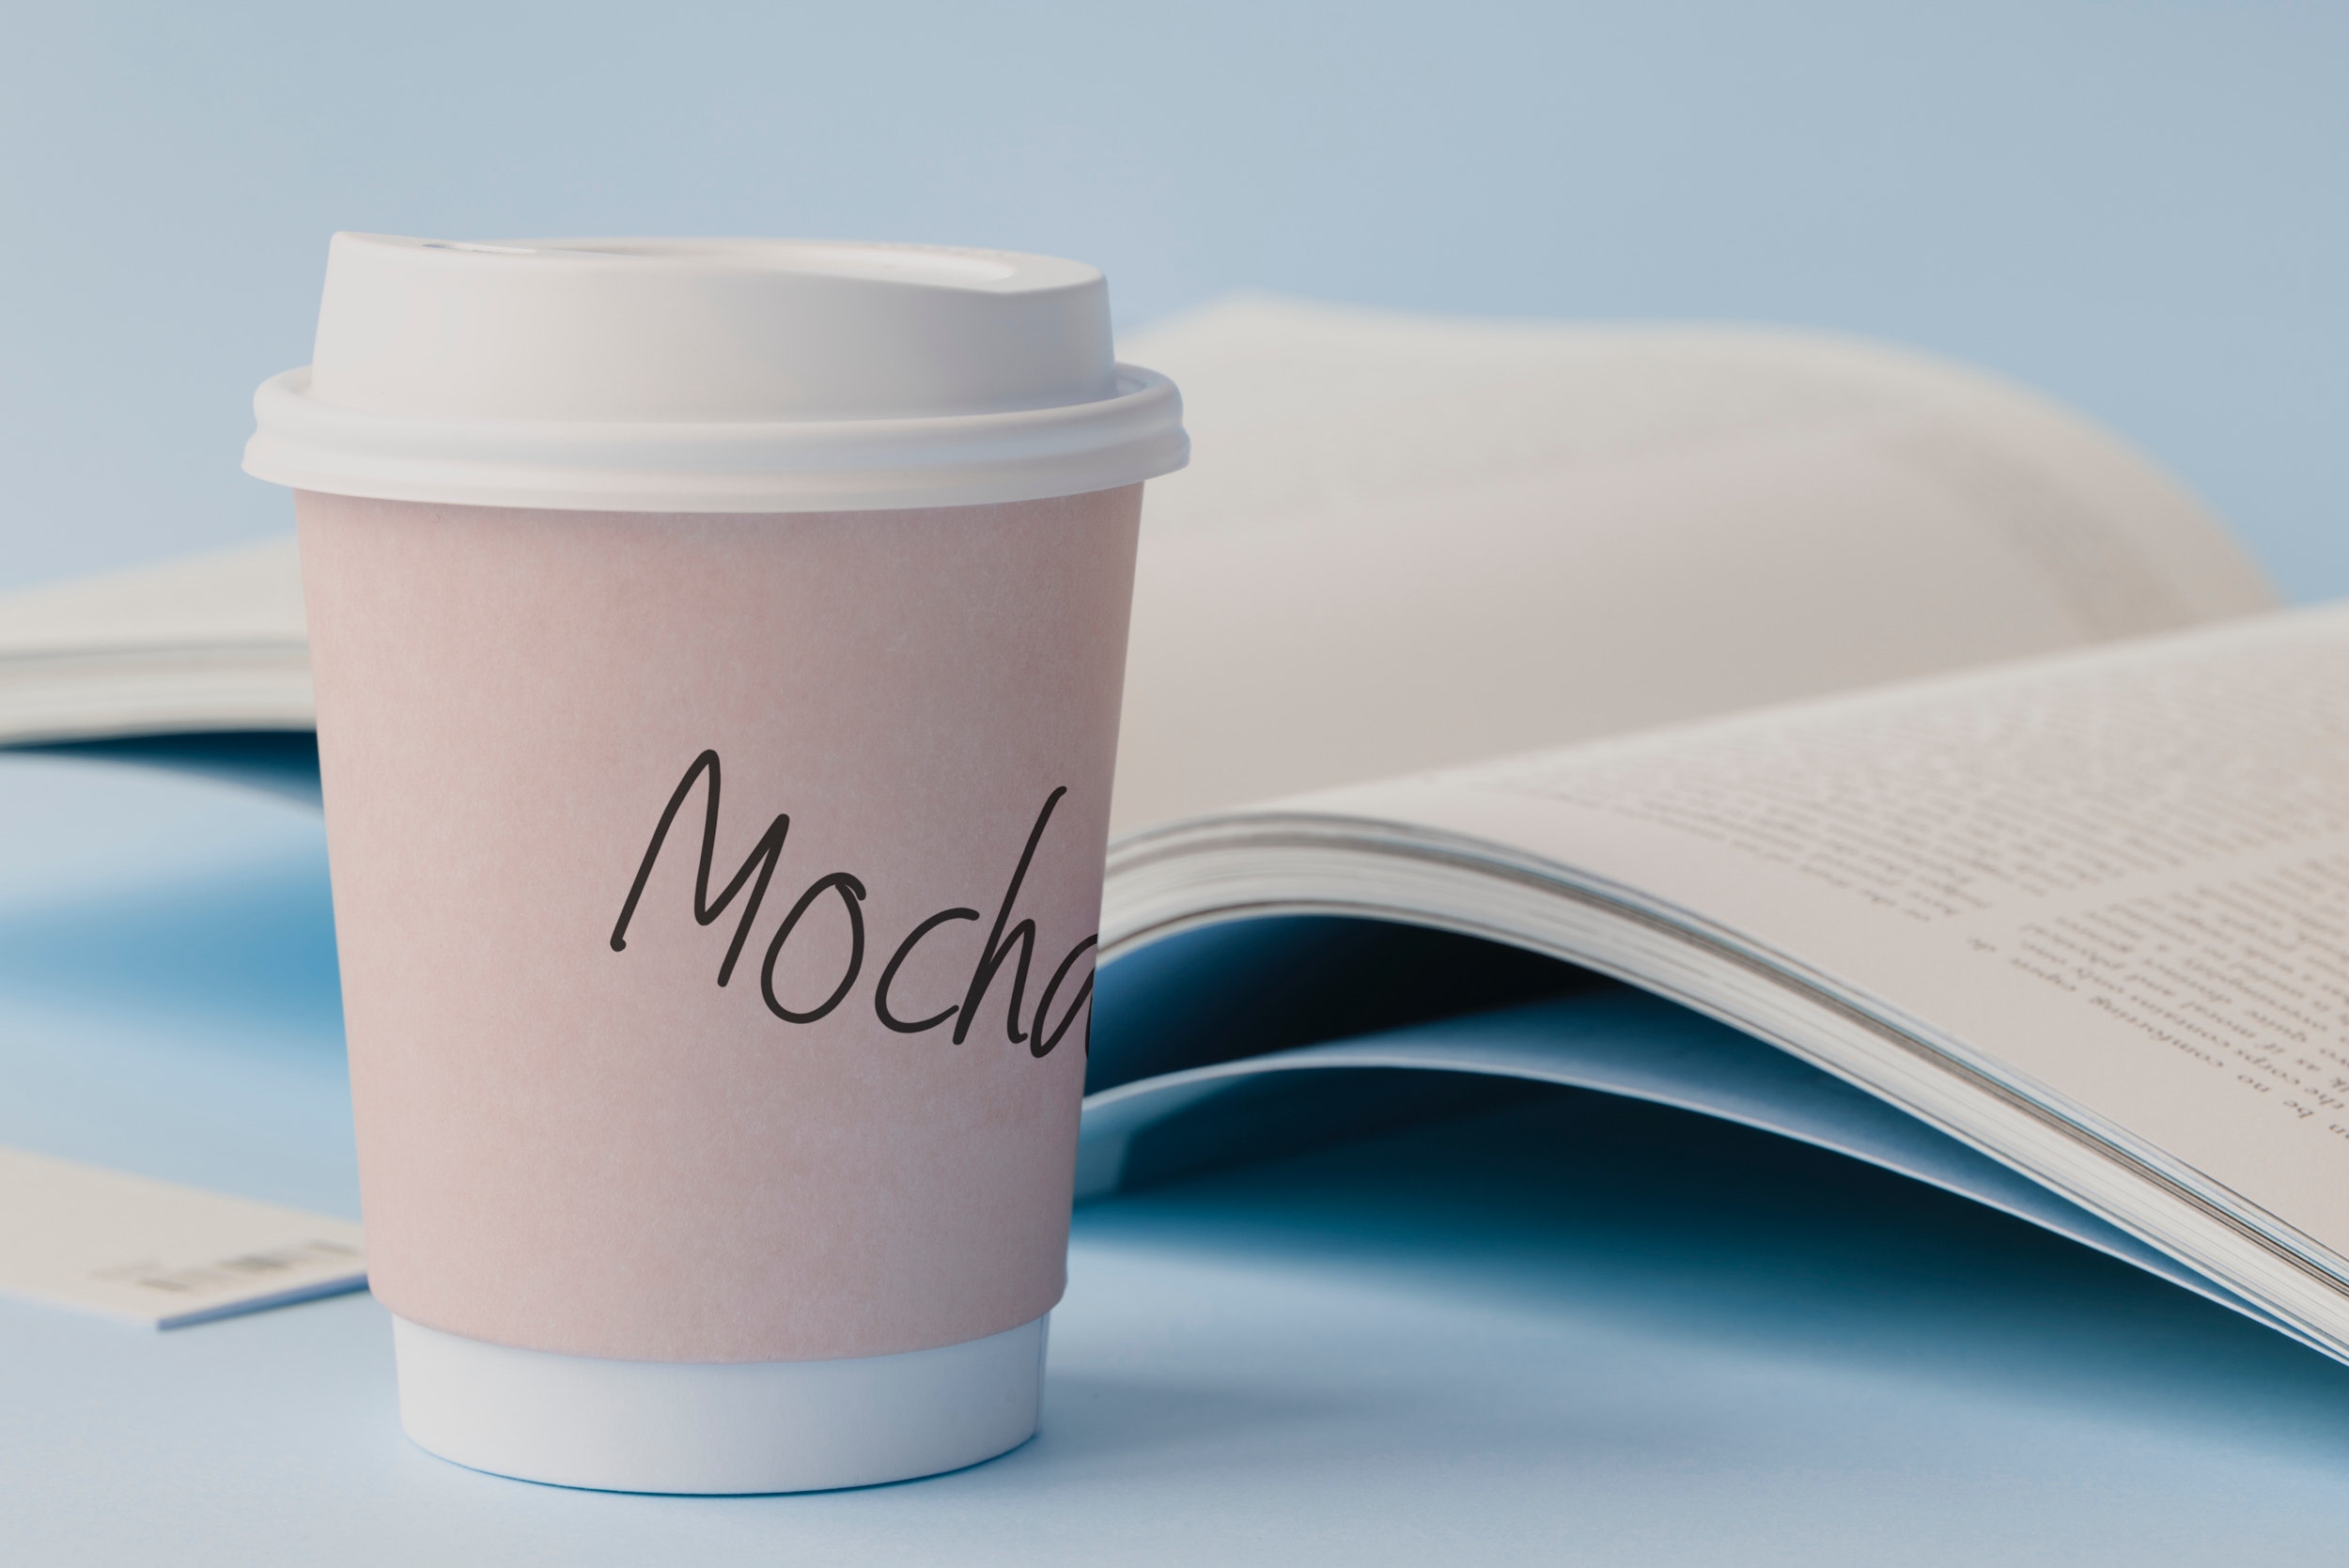 Mocha labeled white disposable coffee cup beside book photo